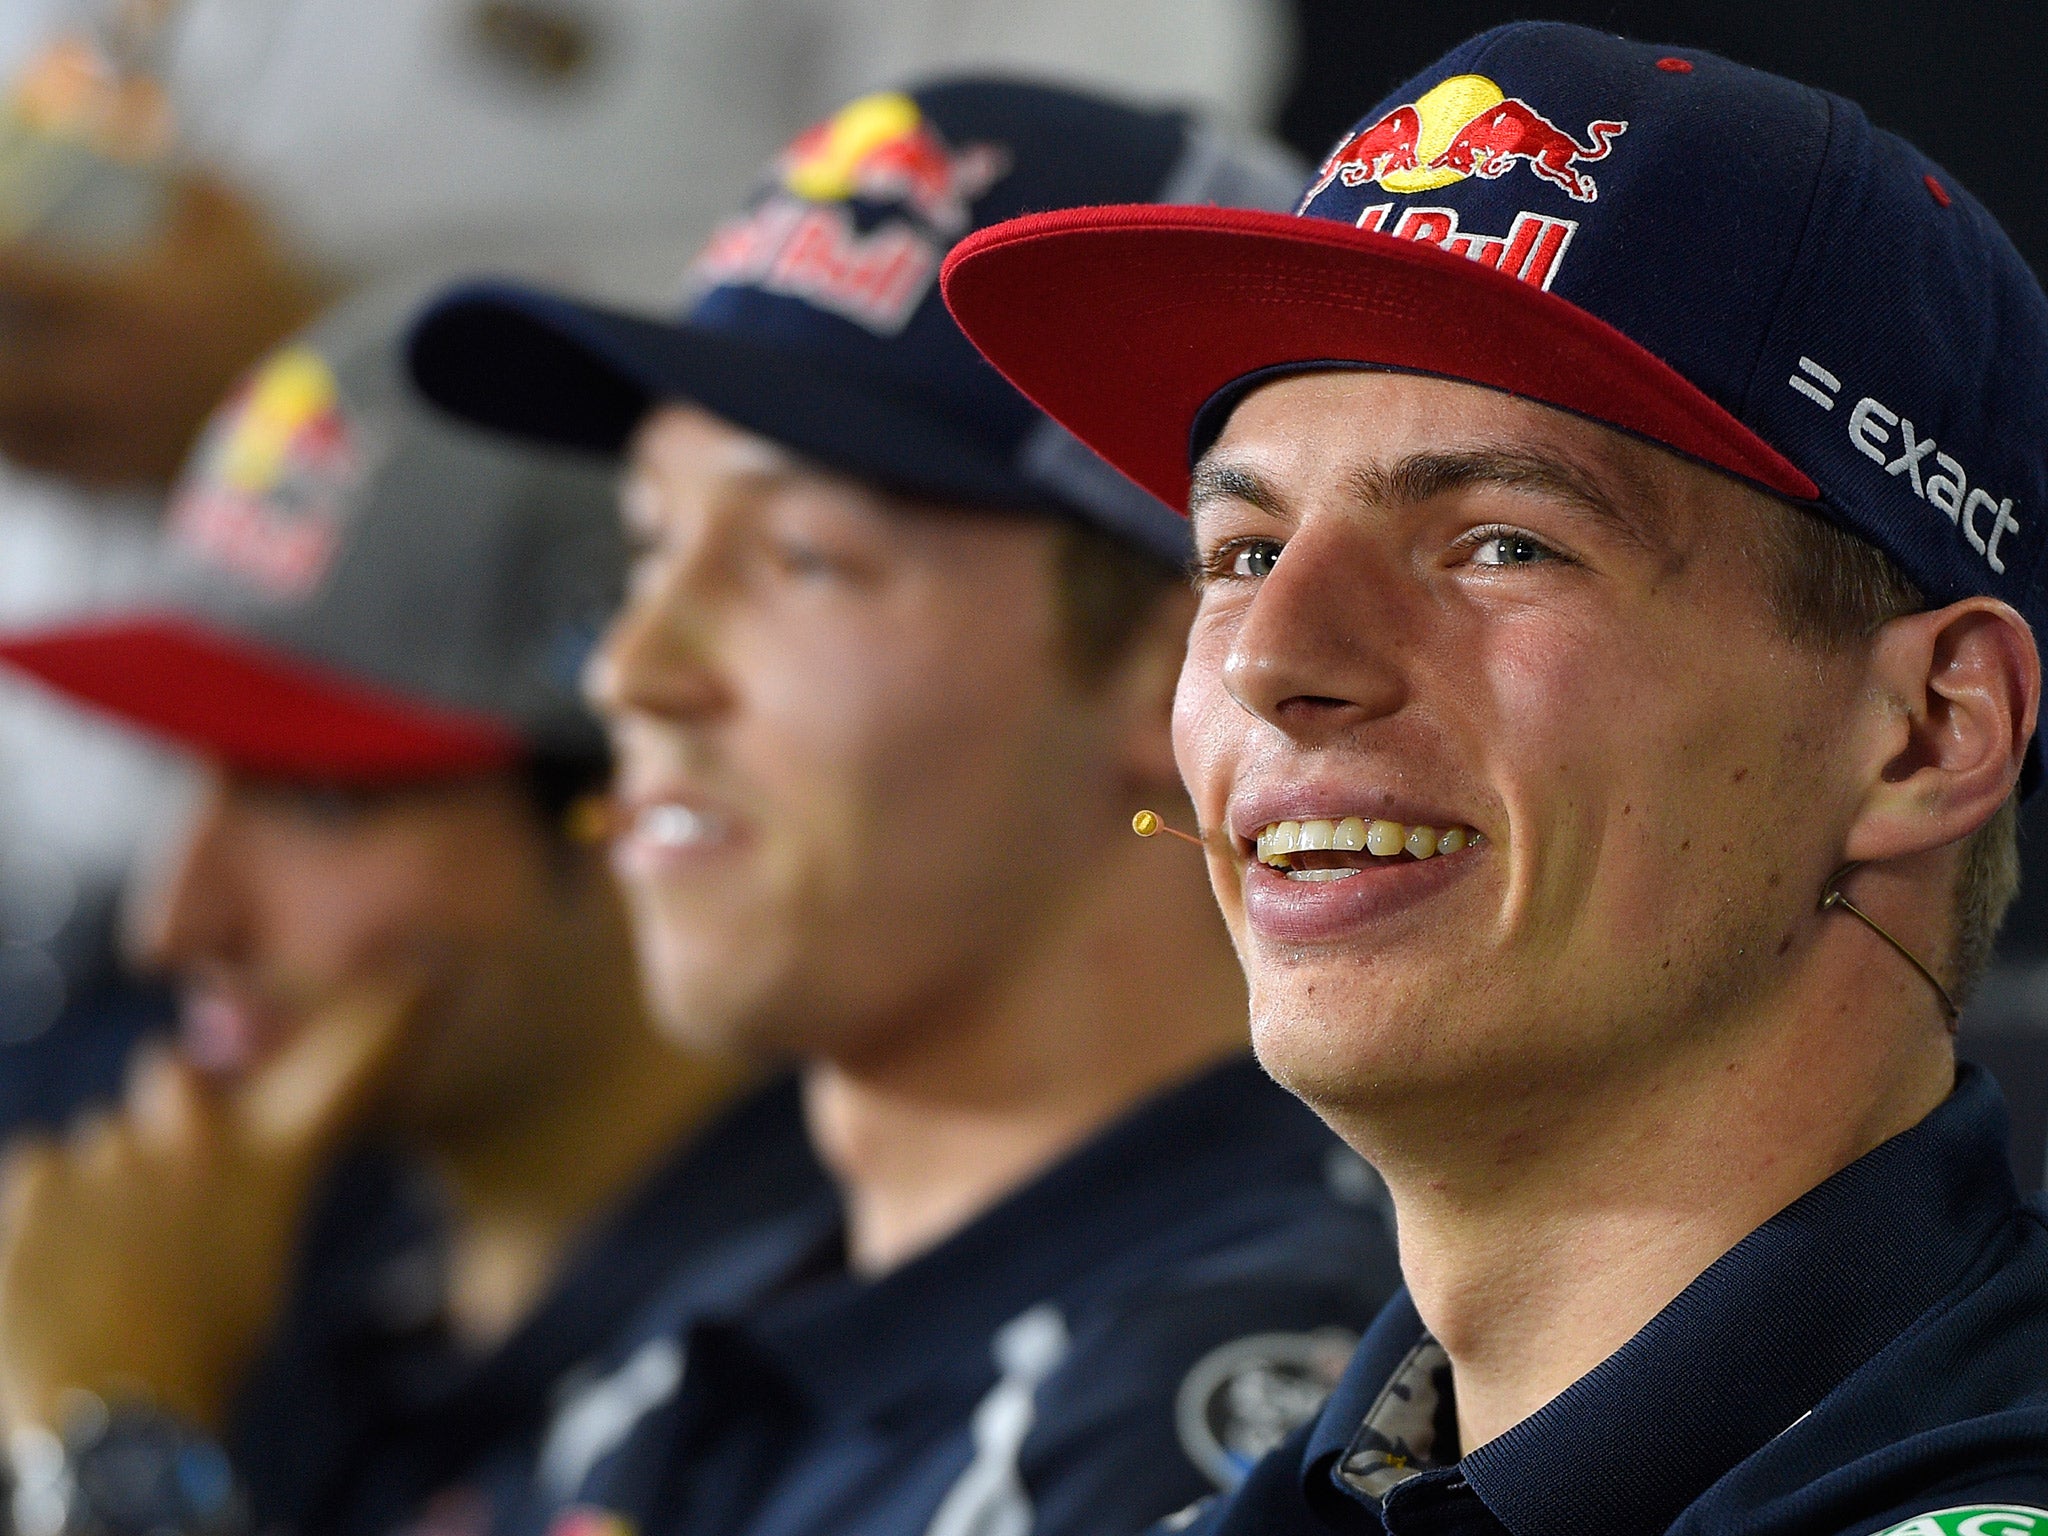 &#13;
Verstappen has replaced Kvyat at Red Bull for the rest of the season &#13;